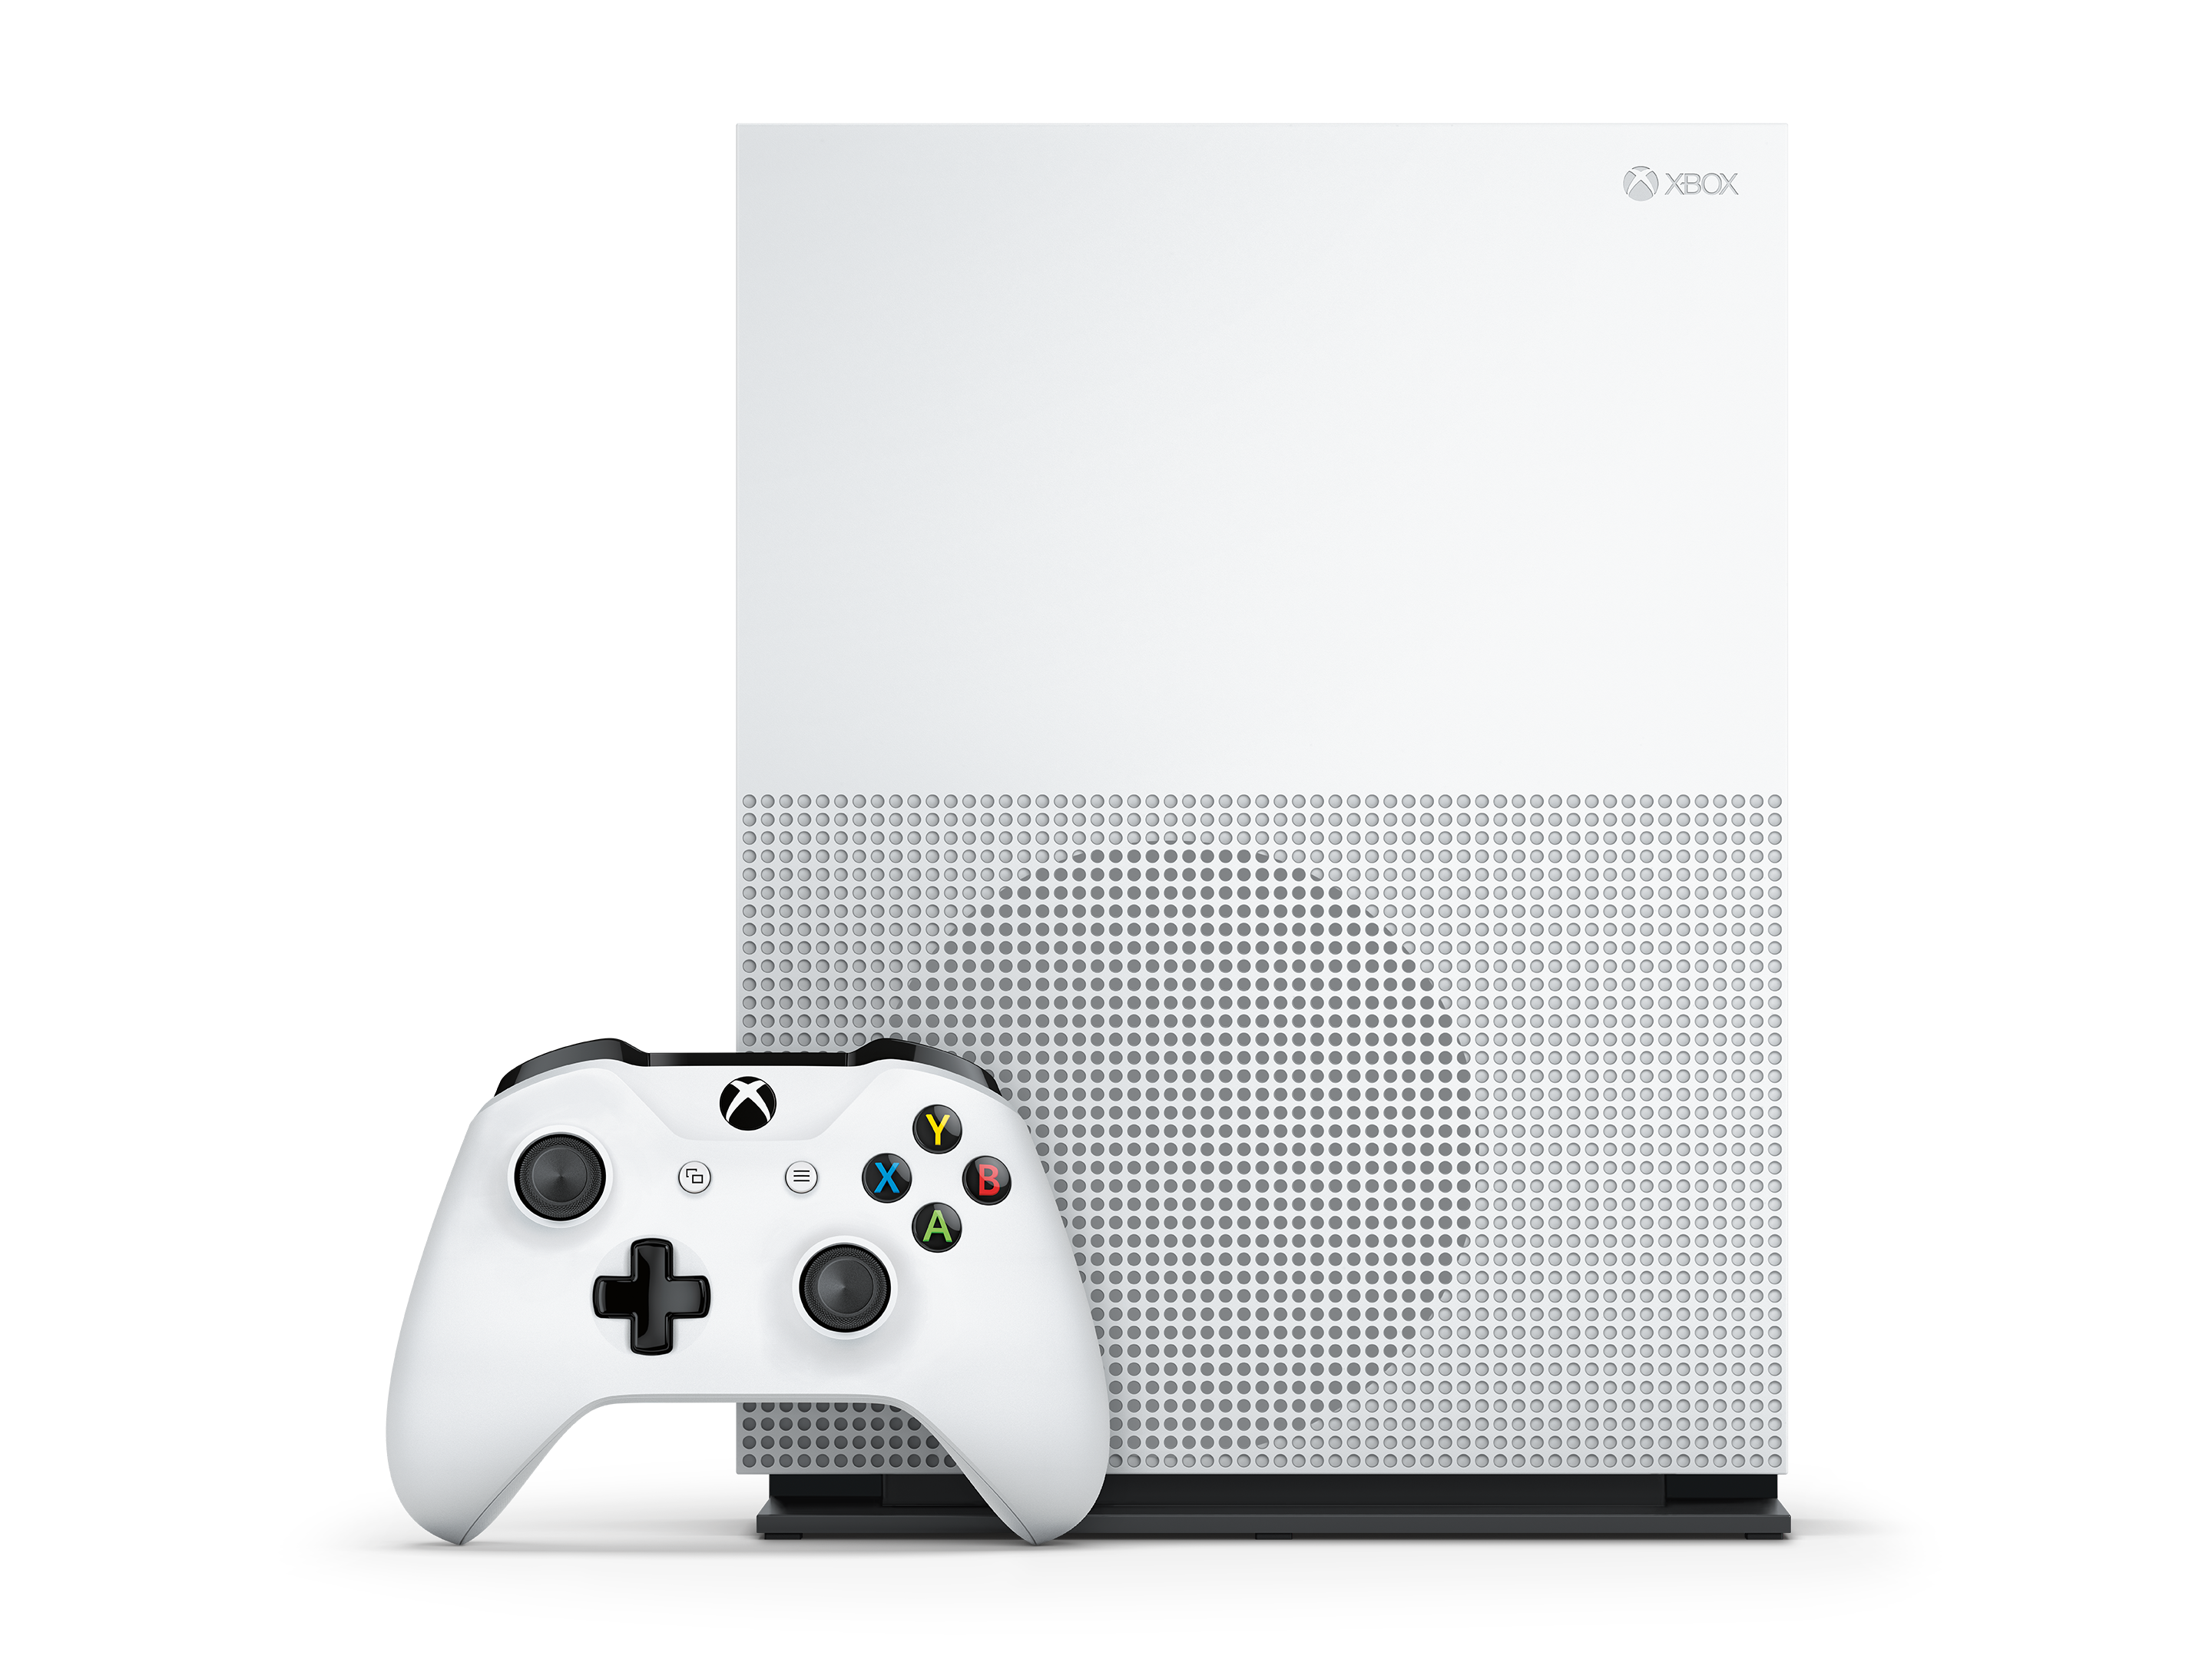 Unboxed: The Xbox One S is here!